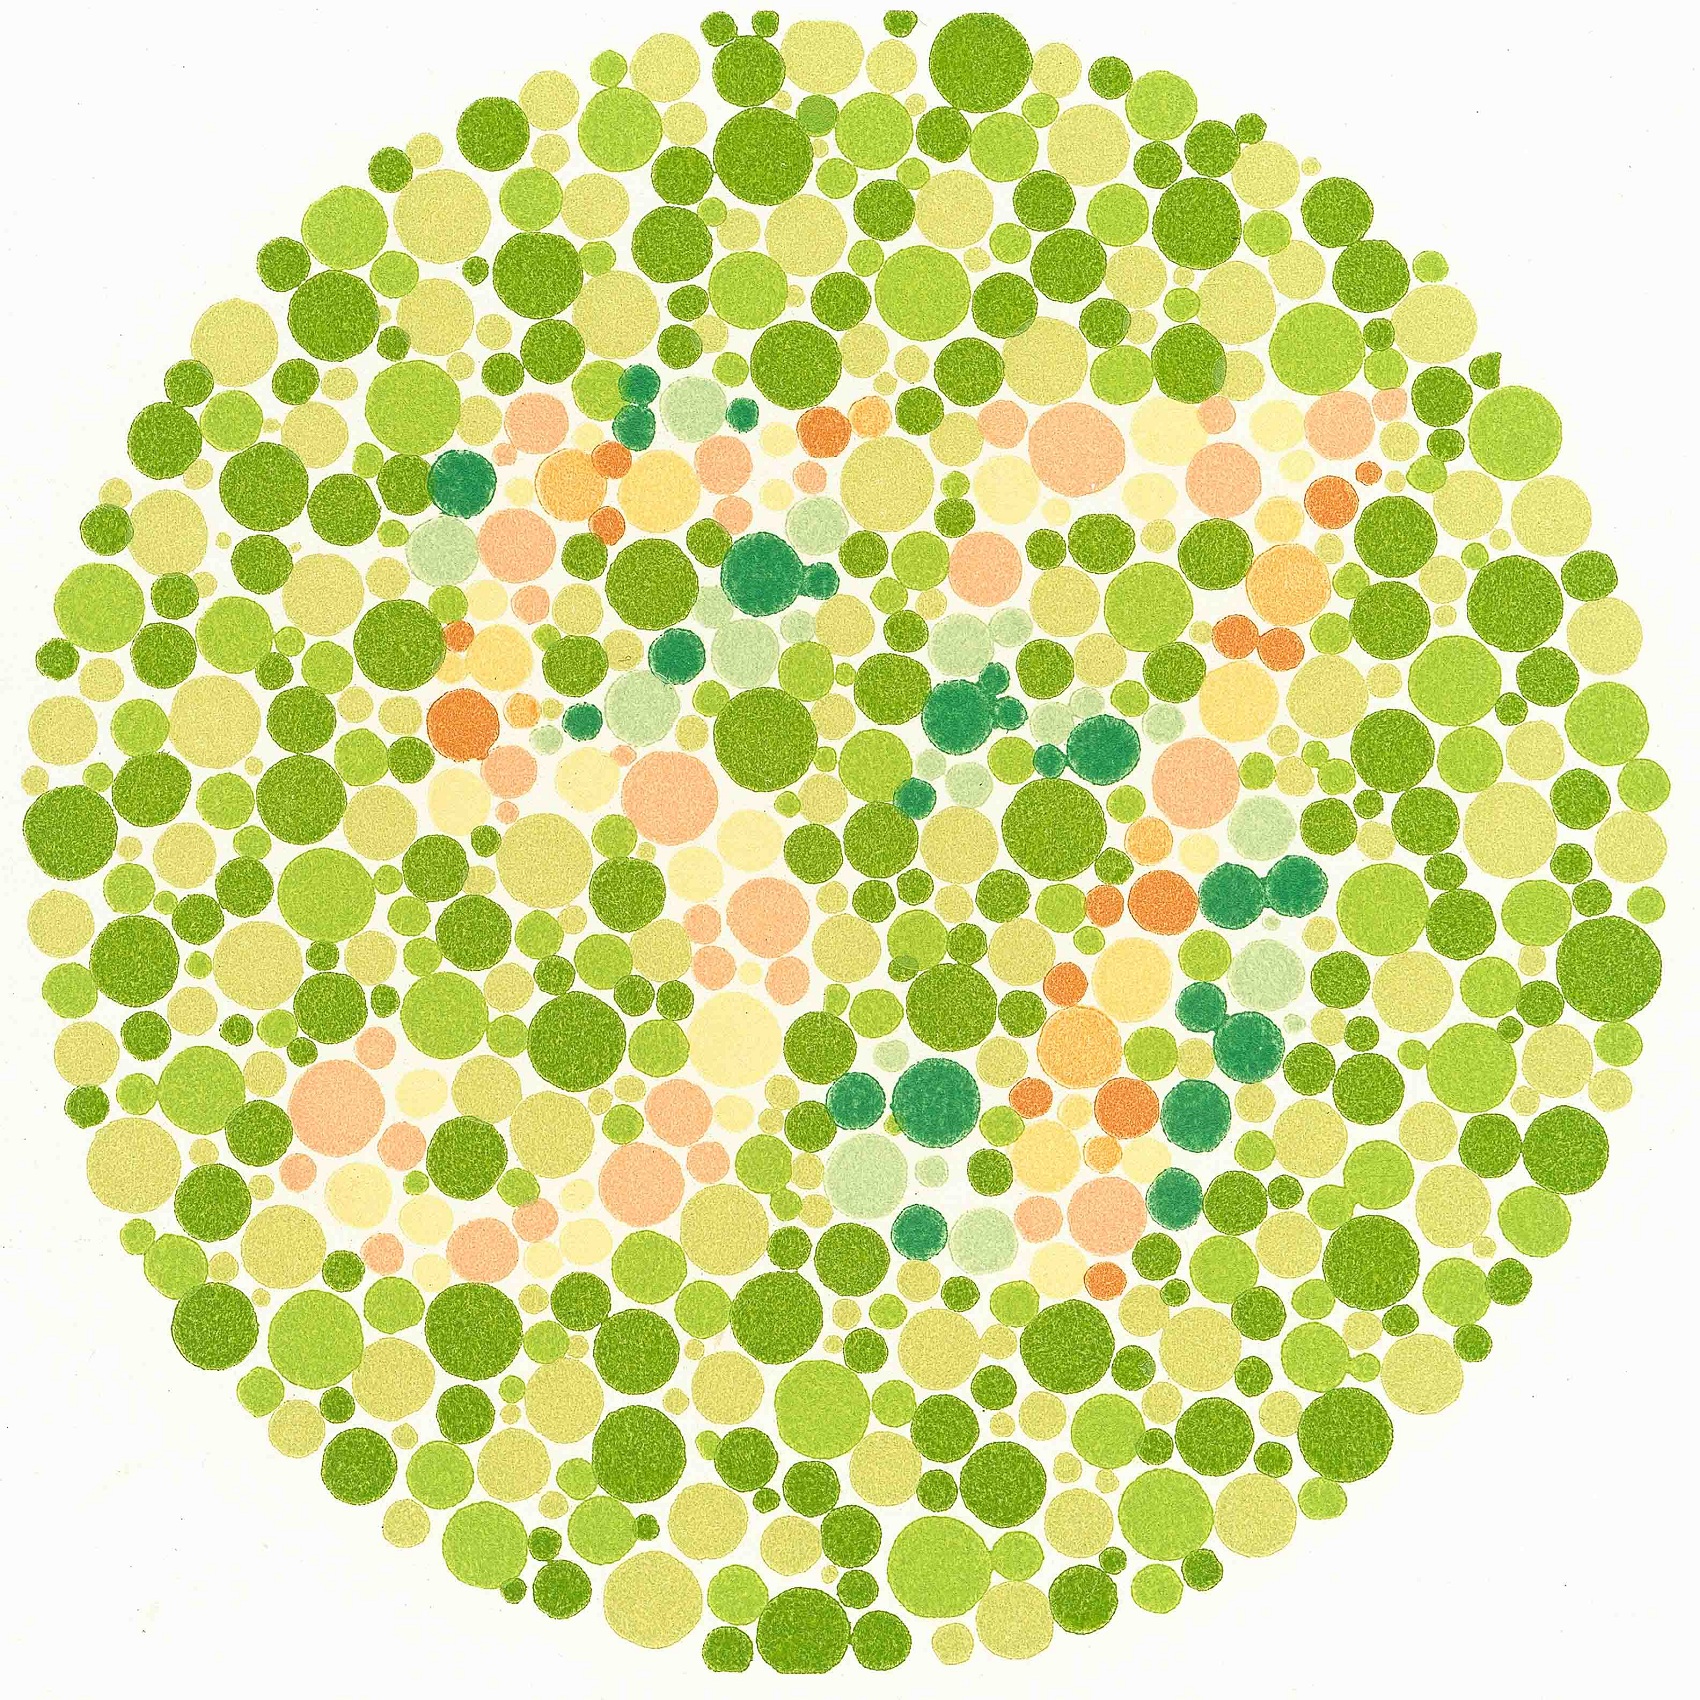 10-images-to-test-the-color-blind-facts-verse